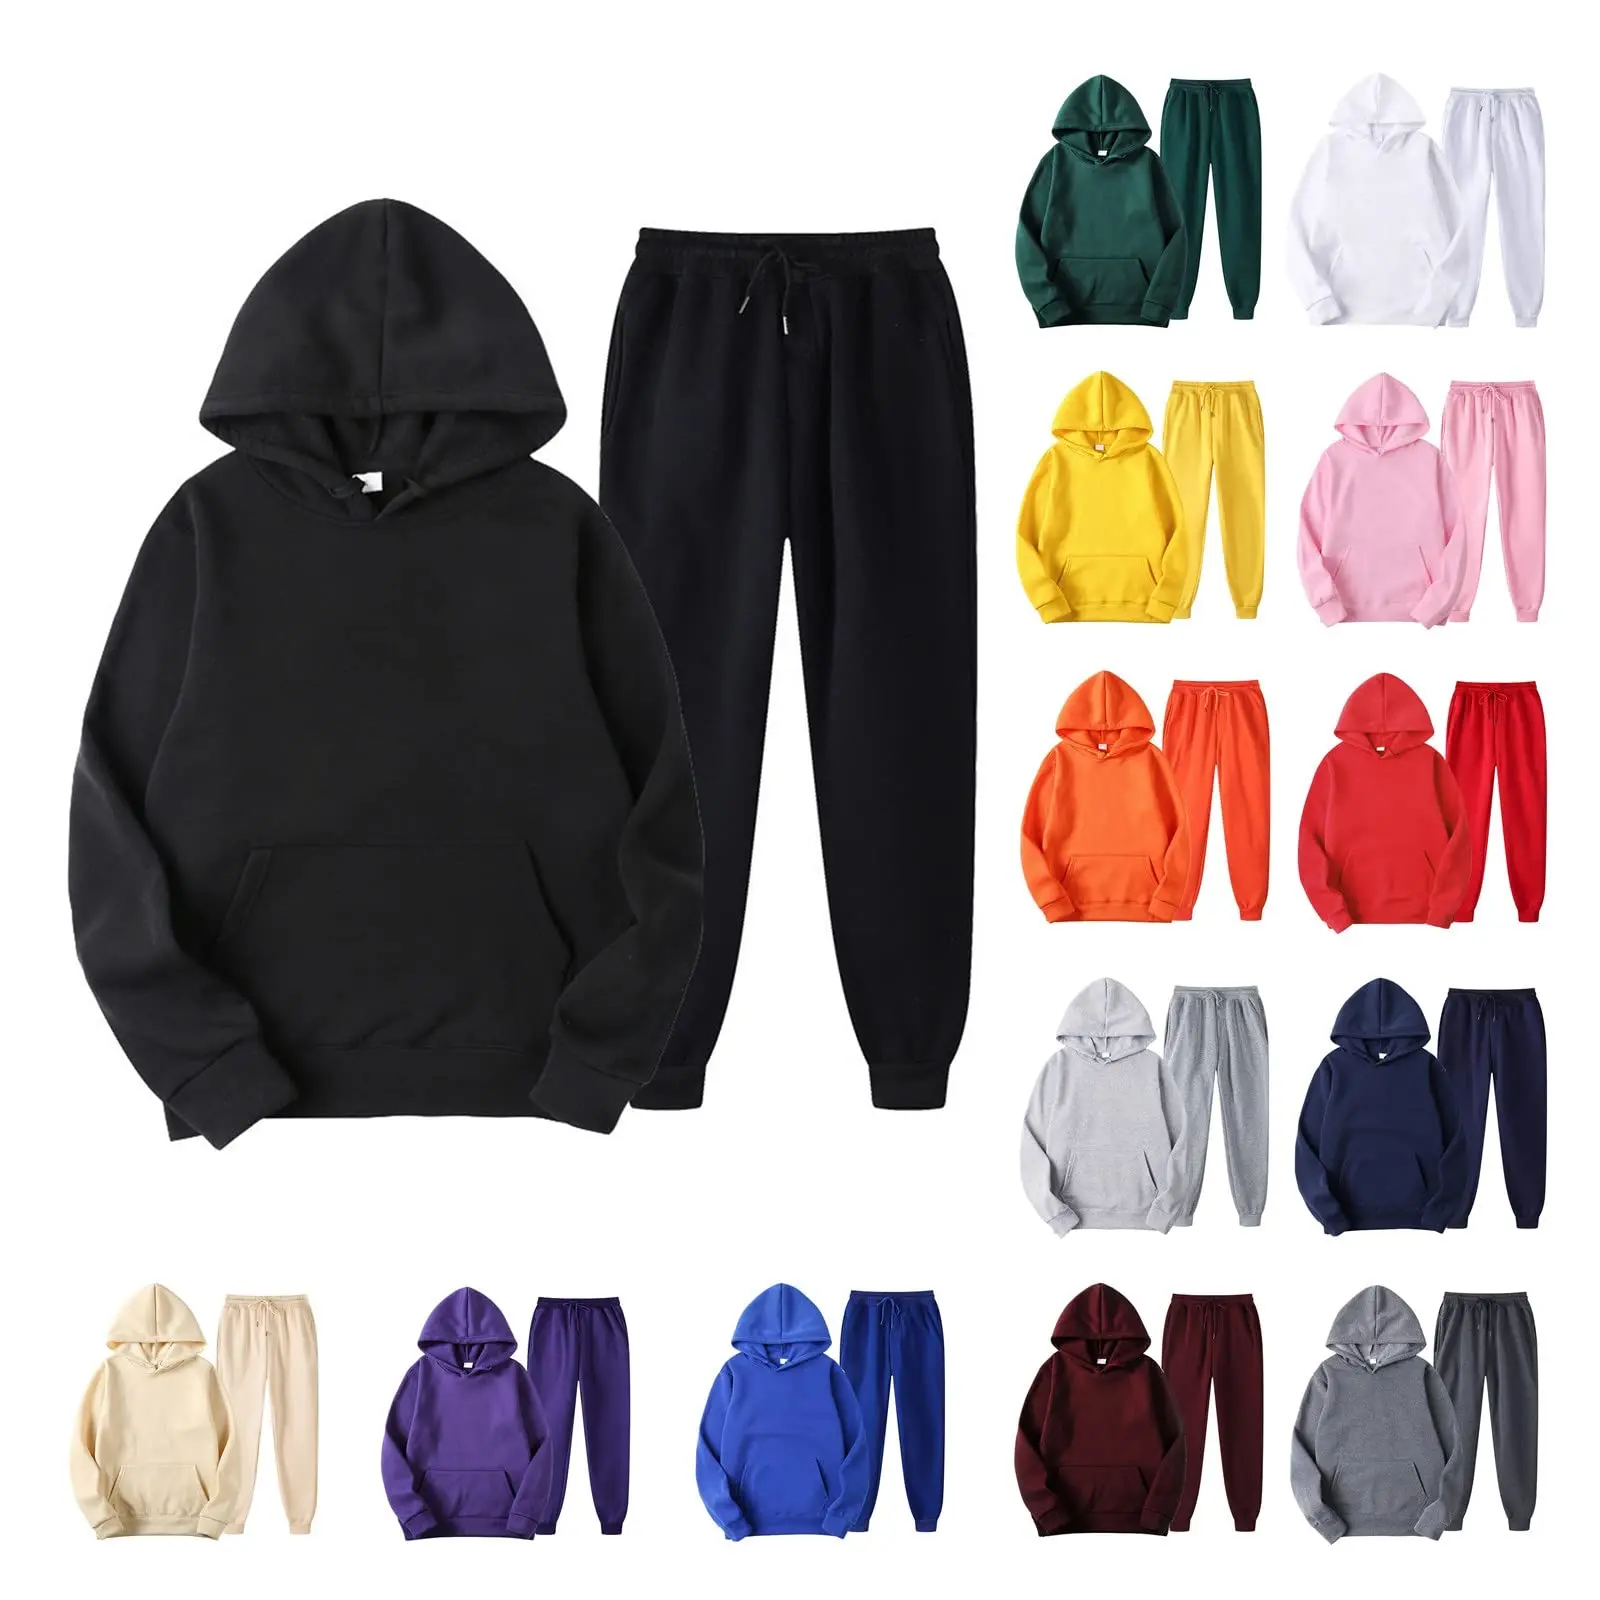 

2PCS Outfits Men's Sports Tracksuits Long Sleeve Hoodies Sweatshirt and Sweatpants Fall Winter Sweatsuit 100% Polyester Adults